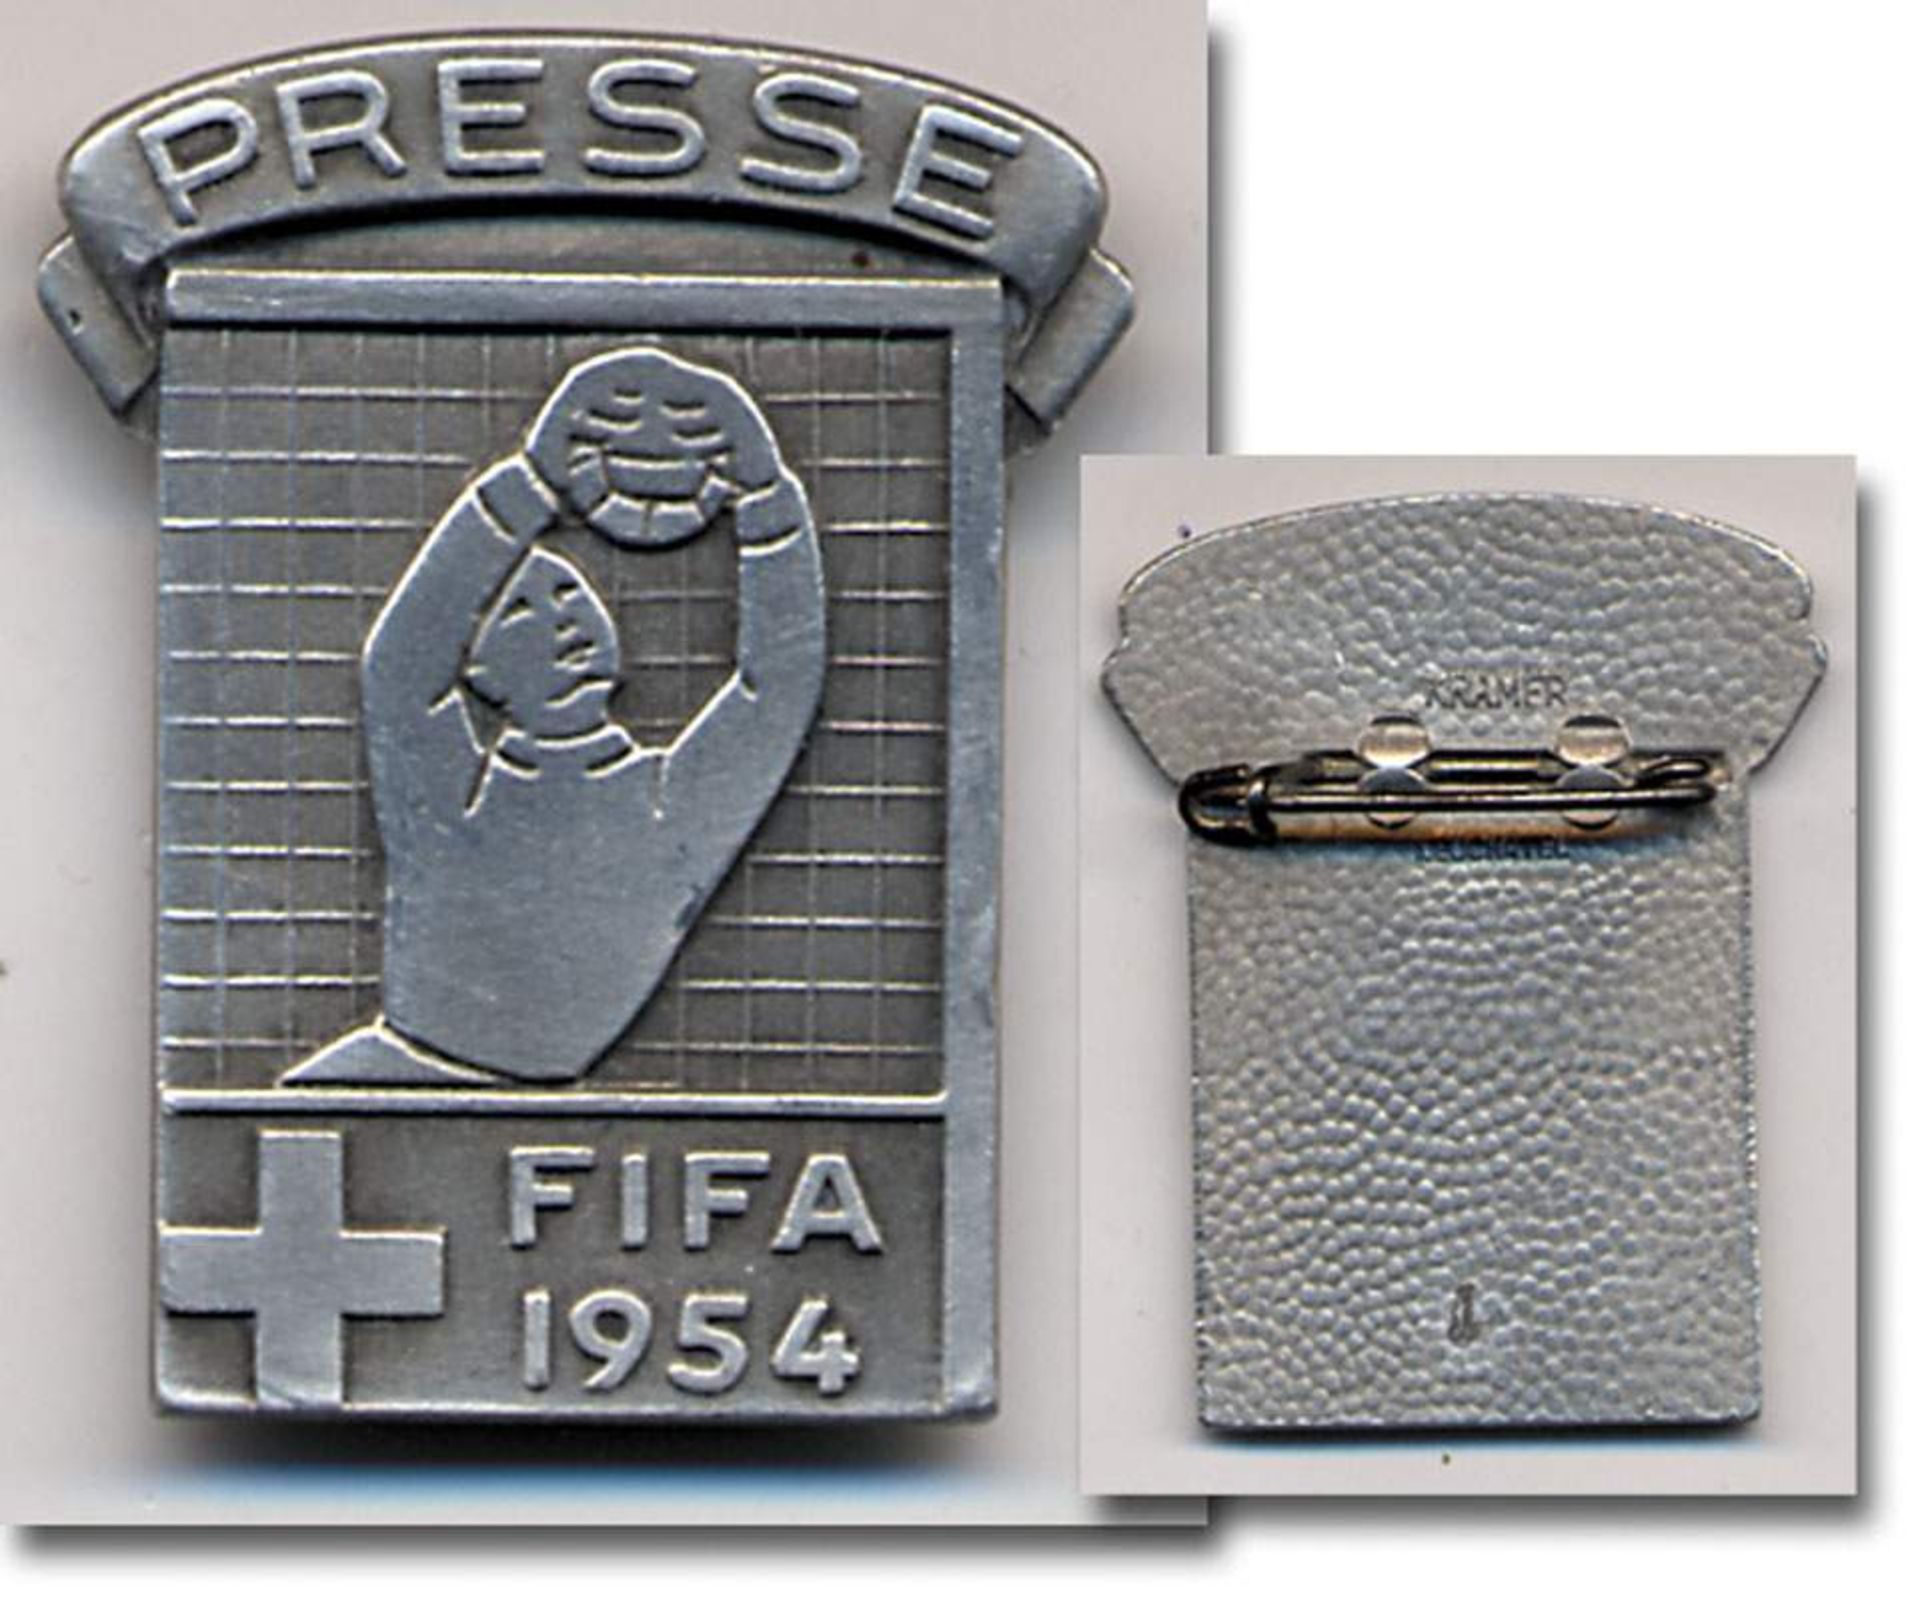 Participation Pin: World Cup 1954. - Official Press Pin from Kramer, in aluminium, size 2.7x3.